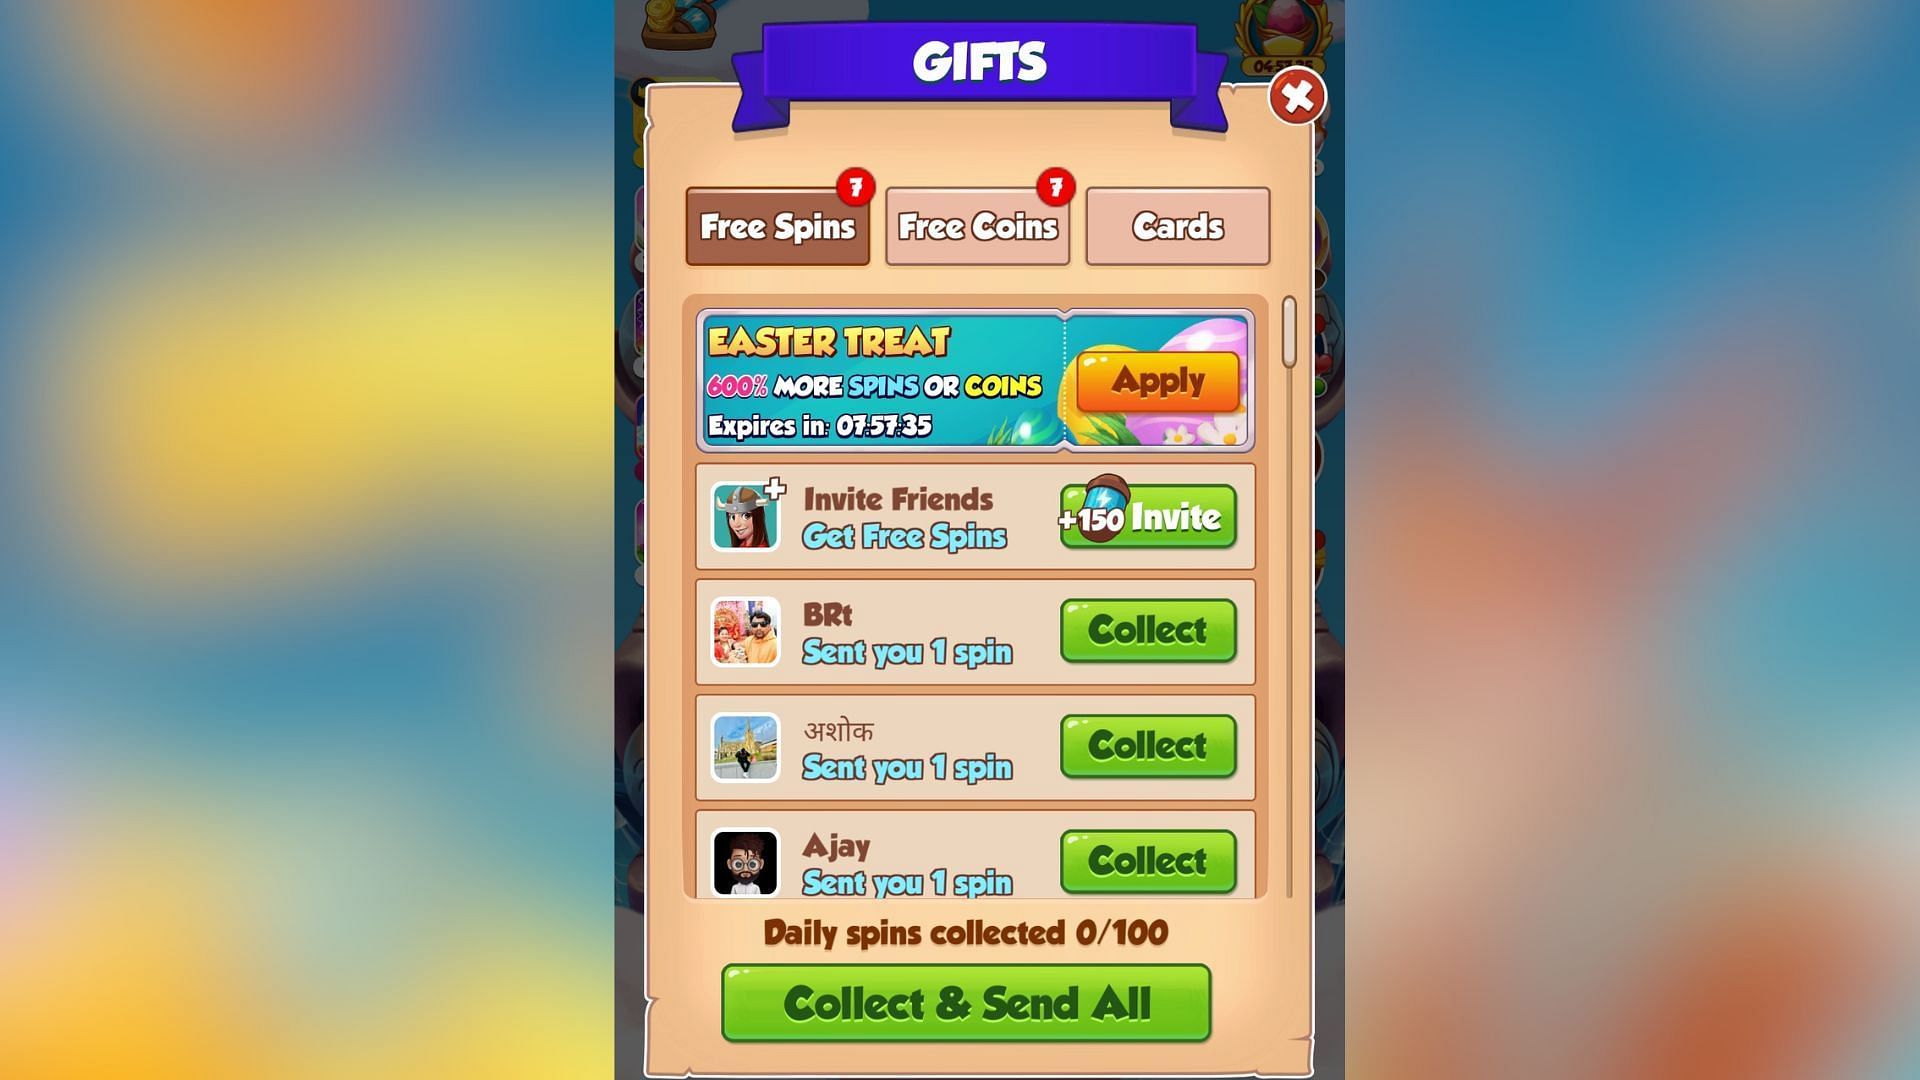 You can claim free Spins every day from your in-game friend list. (Image via Moon Active)